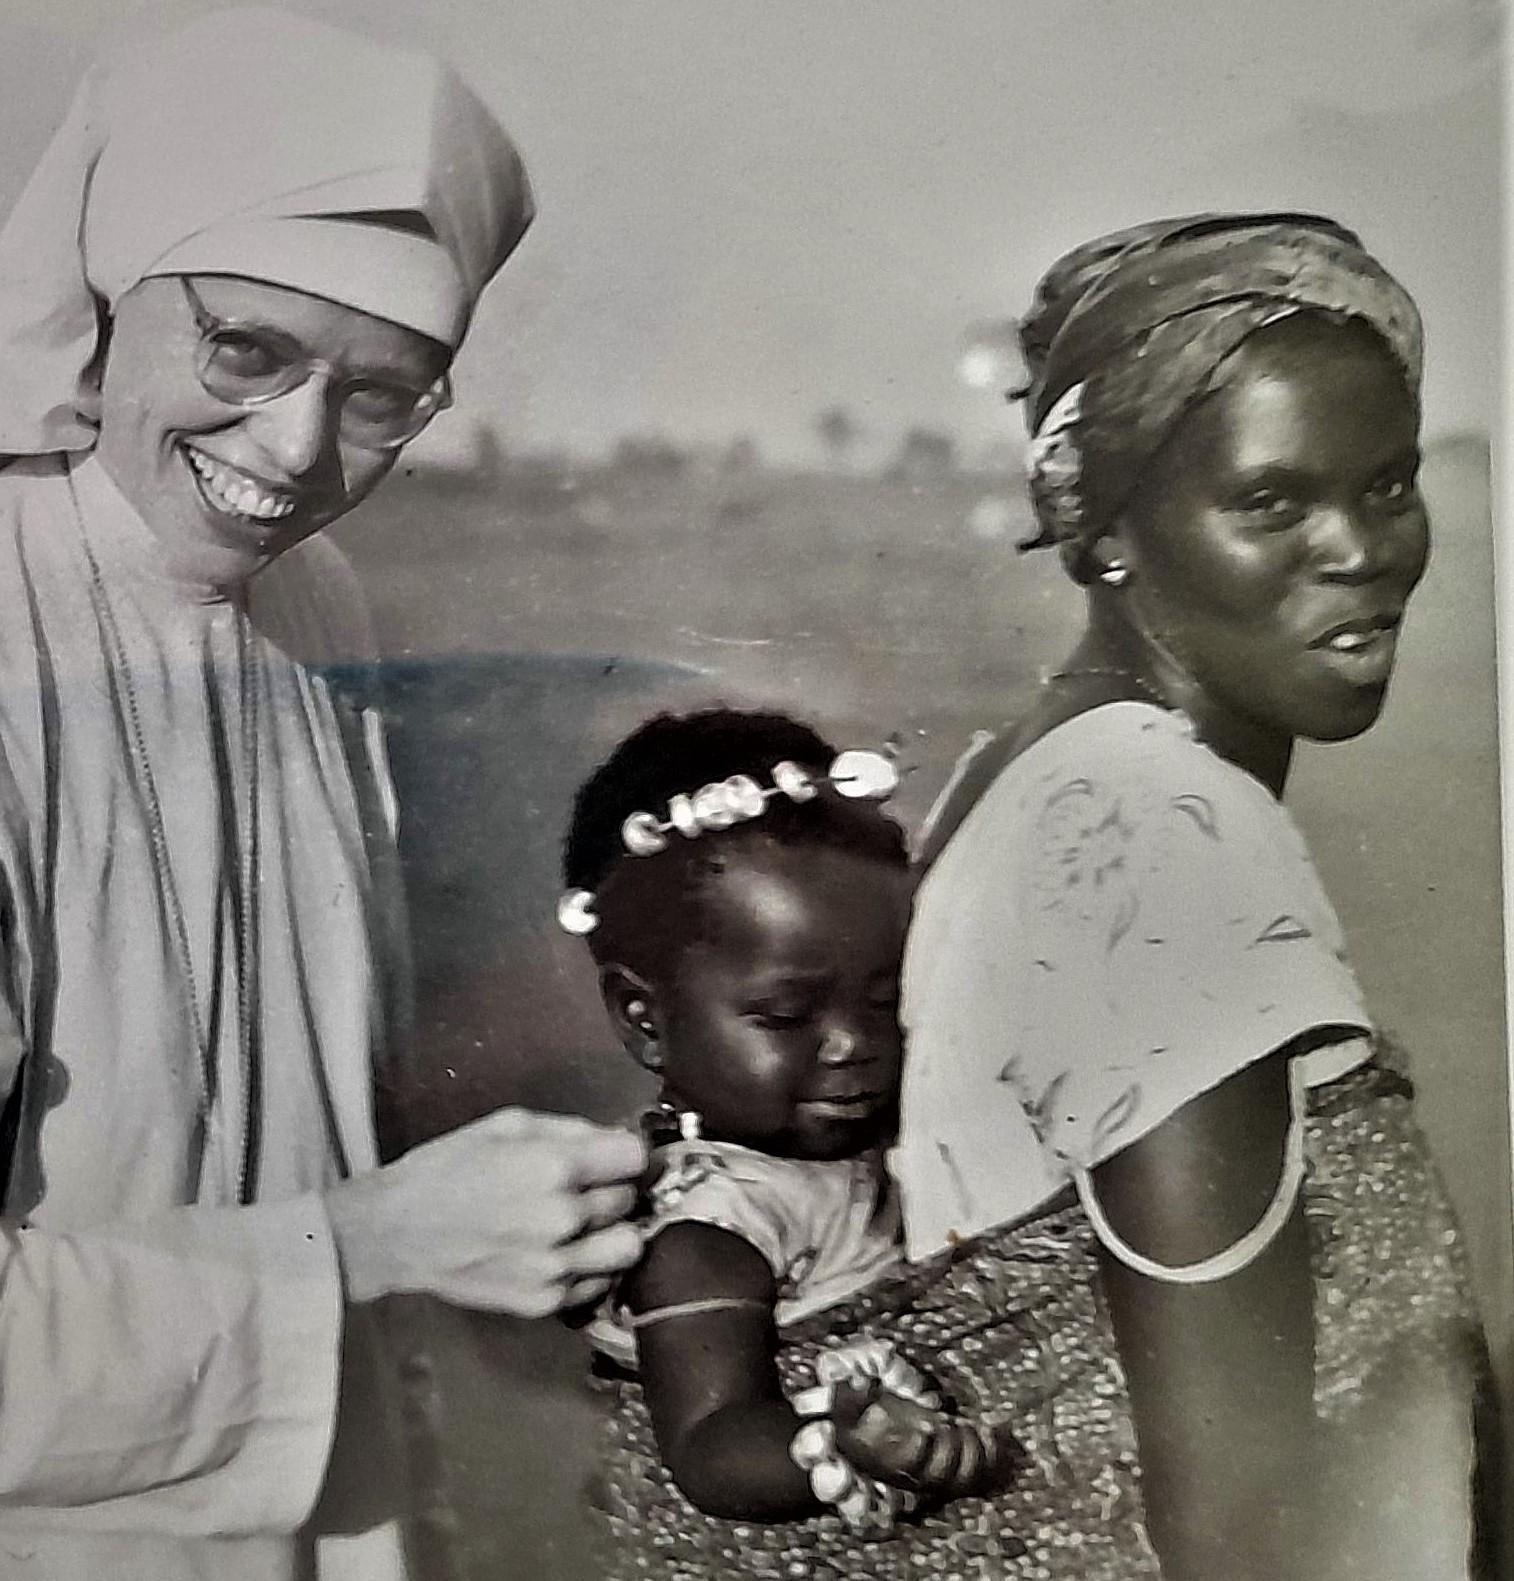 Going on a journey in Ghana in 1950s with mother and child 